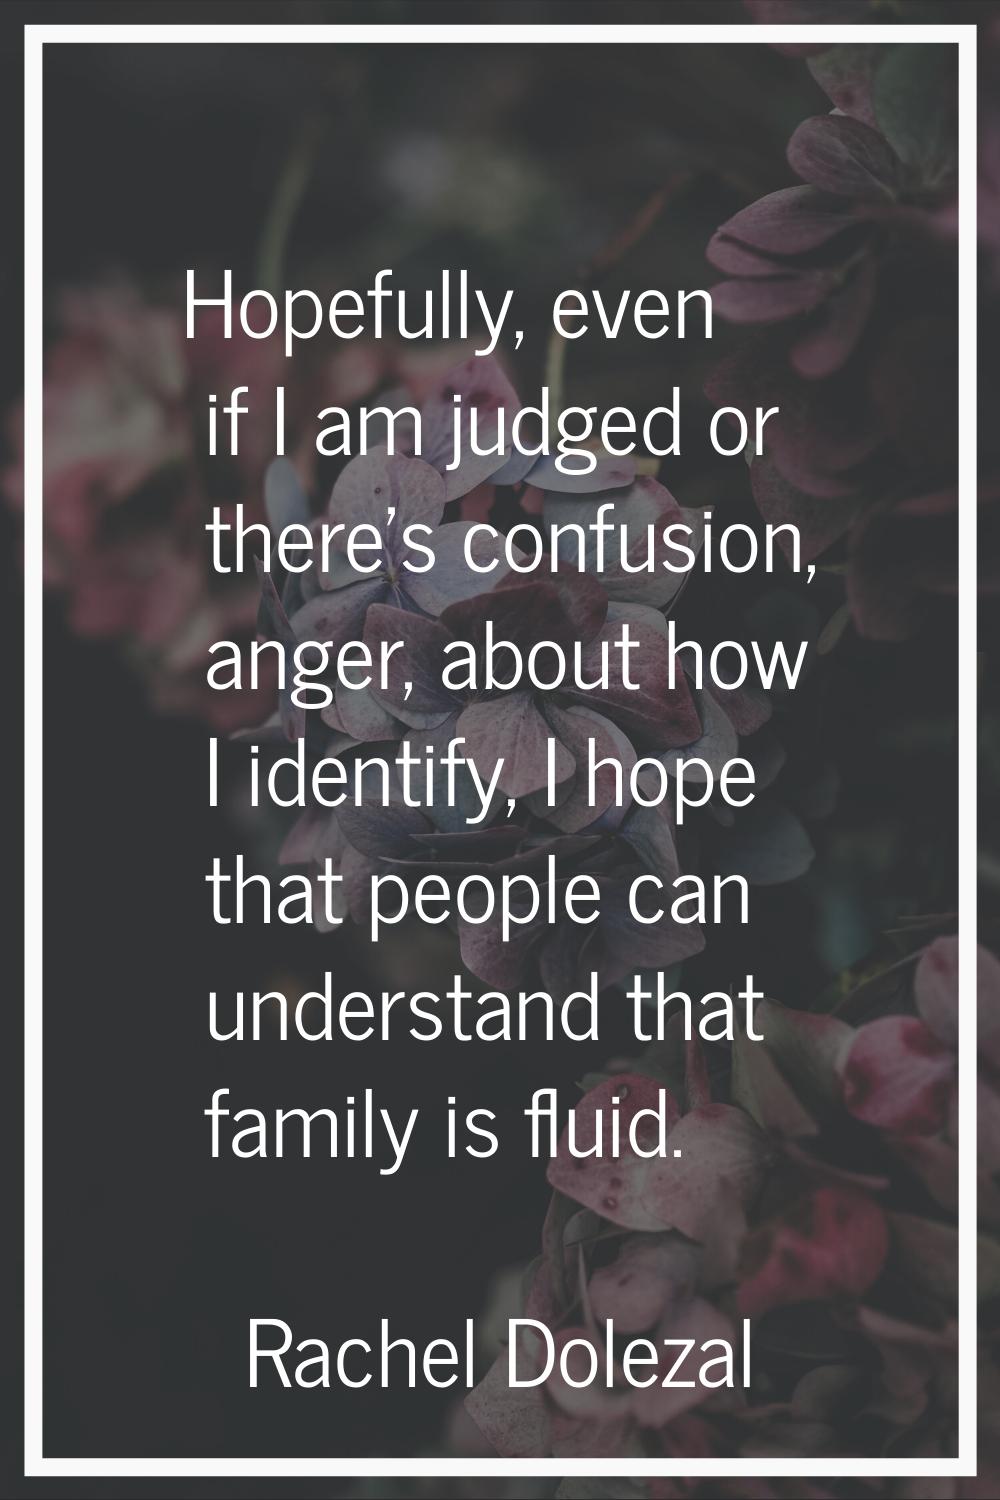 Hopefully, even if I am judged or there's confusion, anger, about how I identify, I hope that peopl